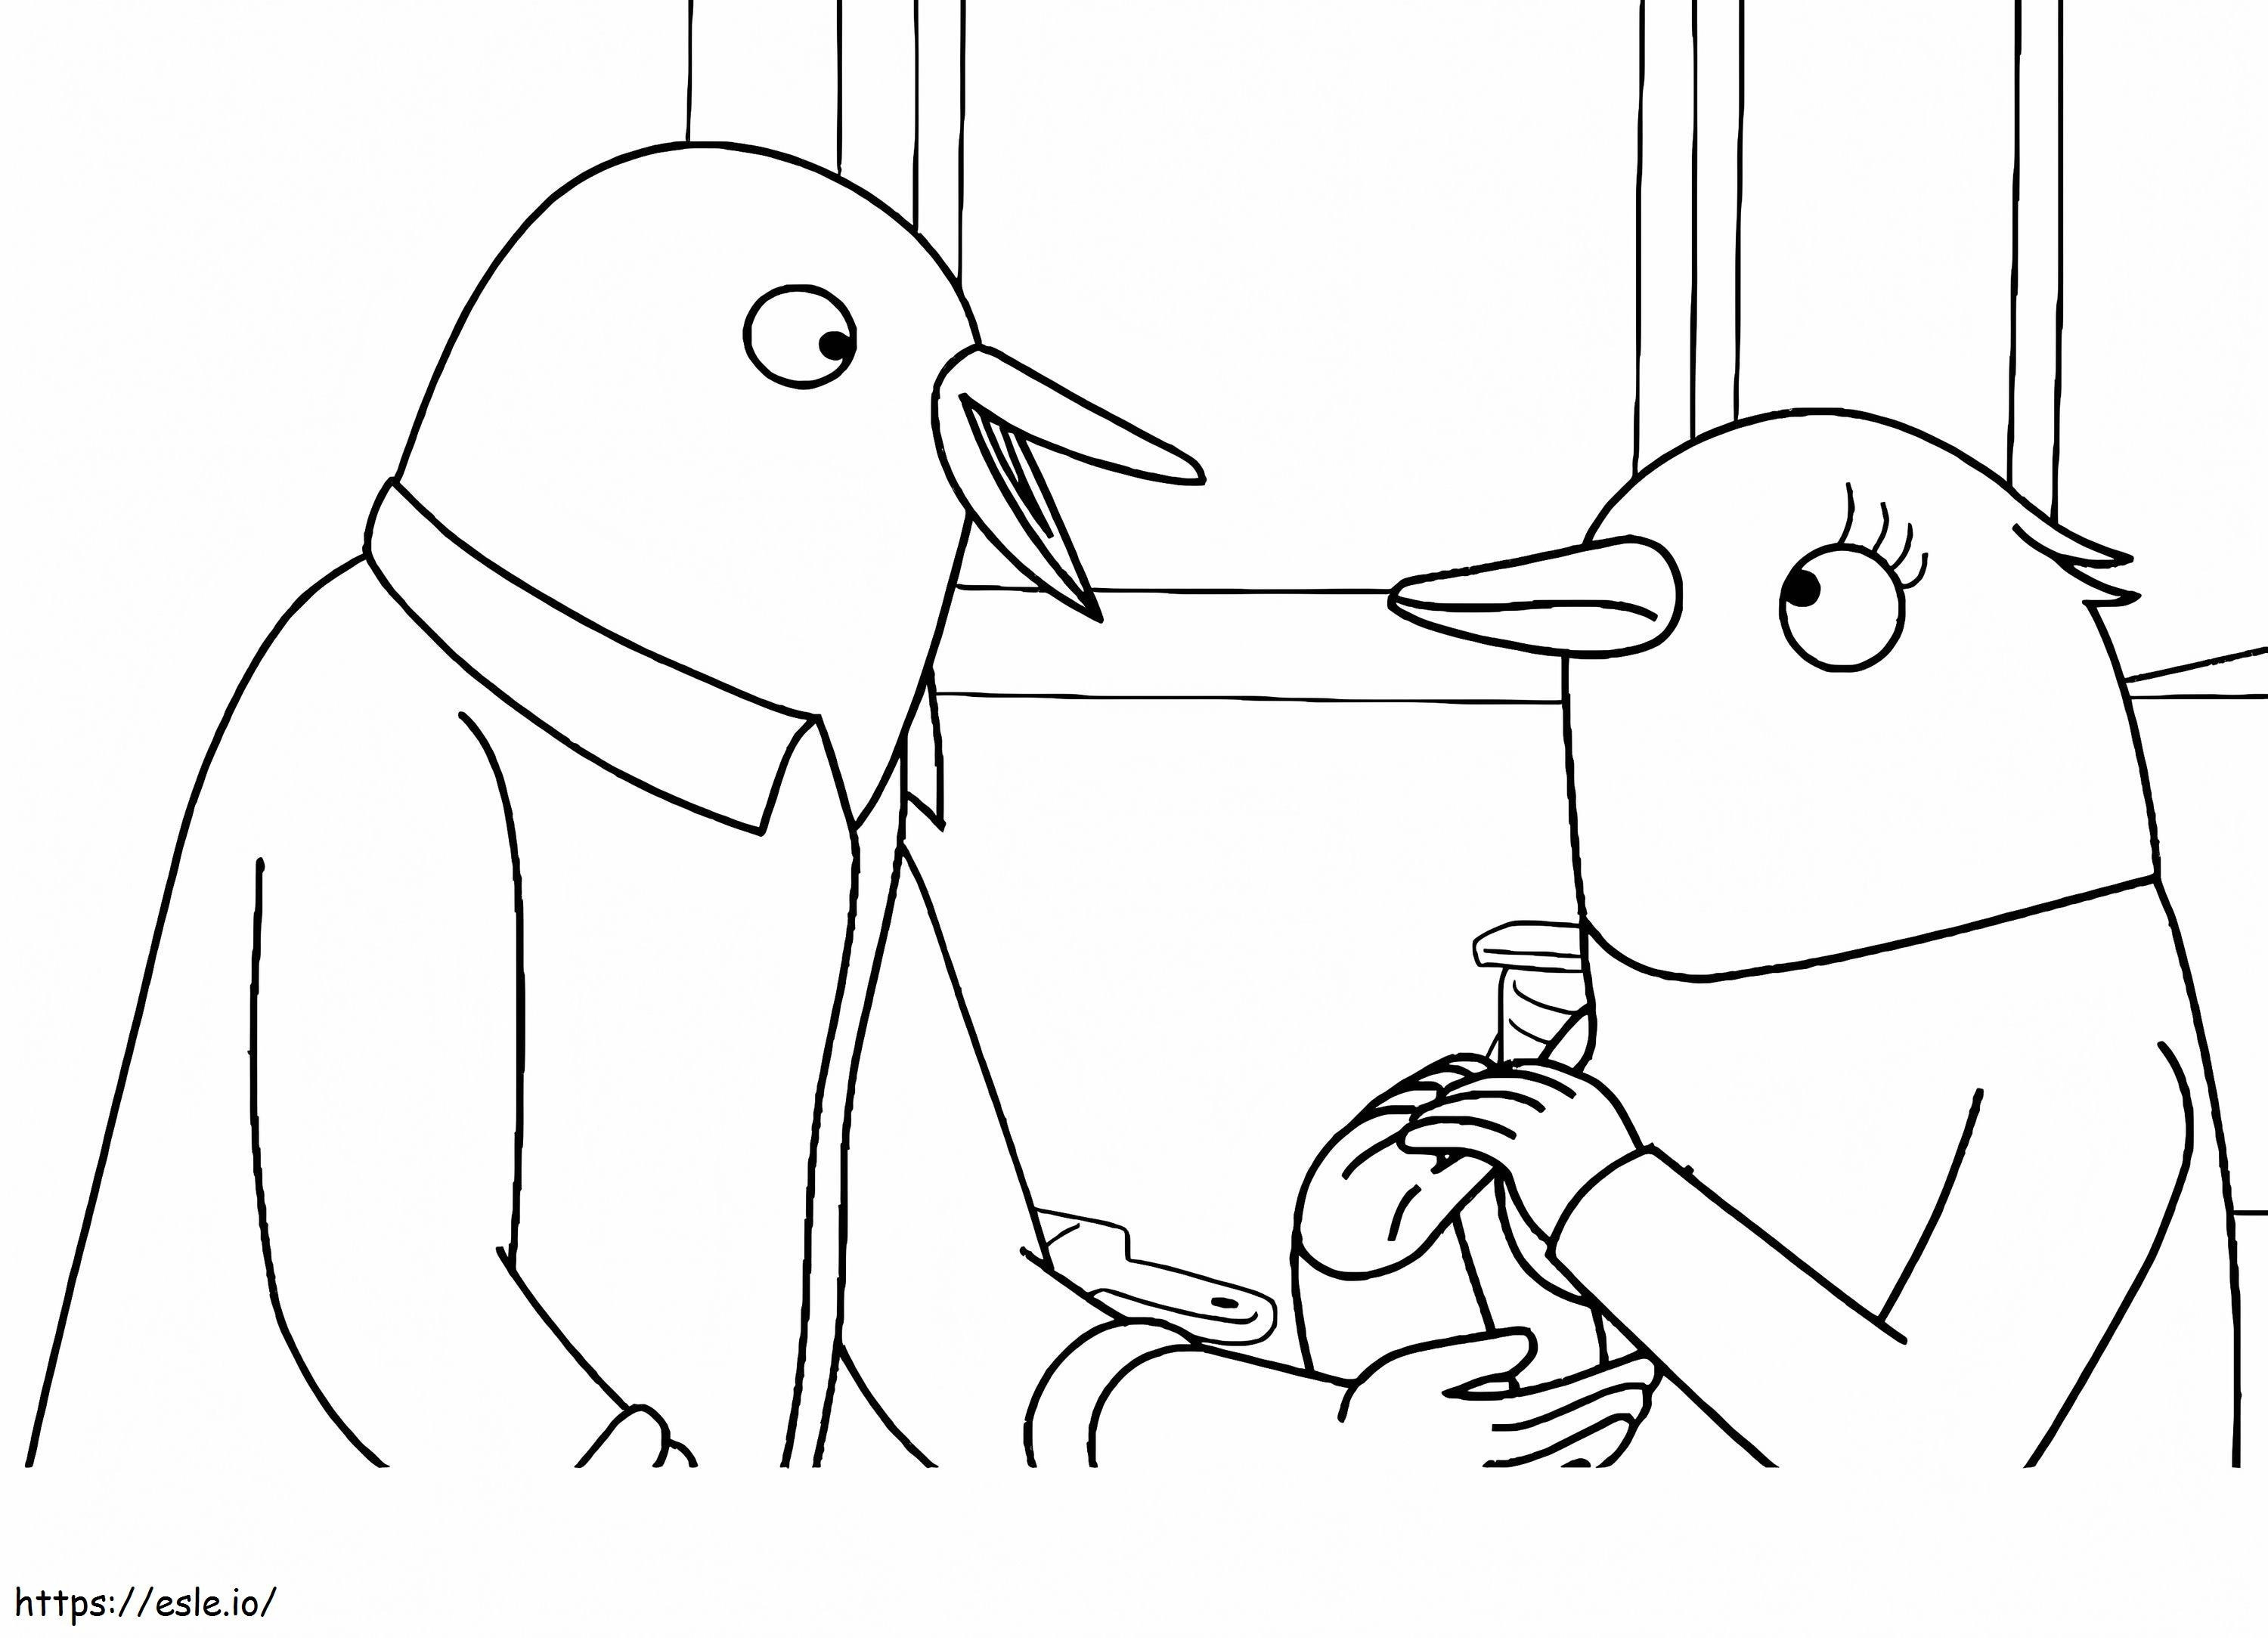 Bertie And Speckle coloring page